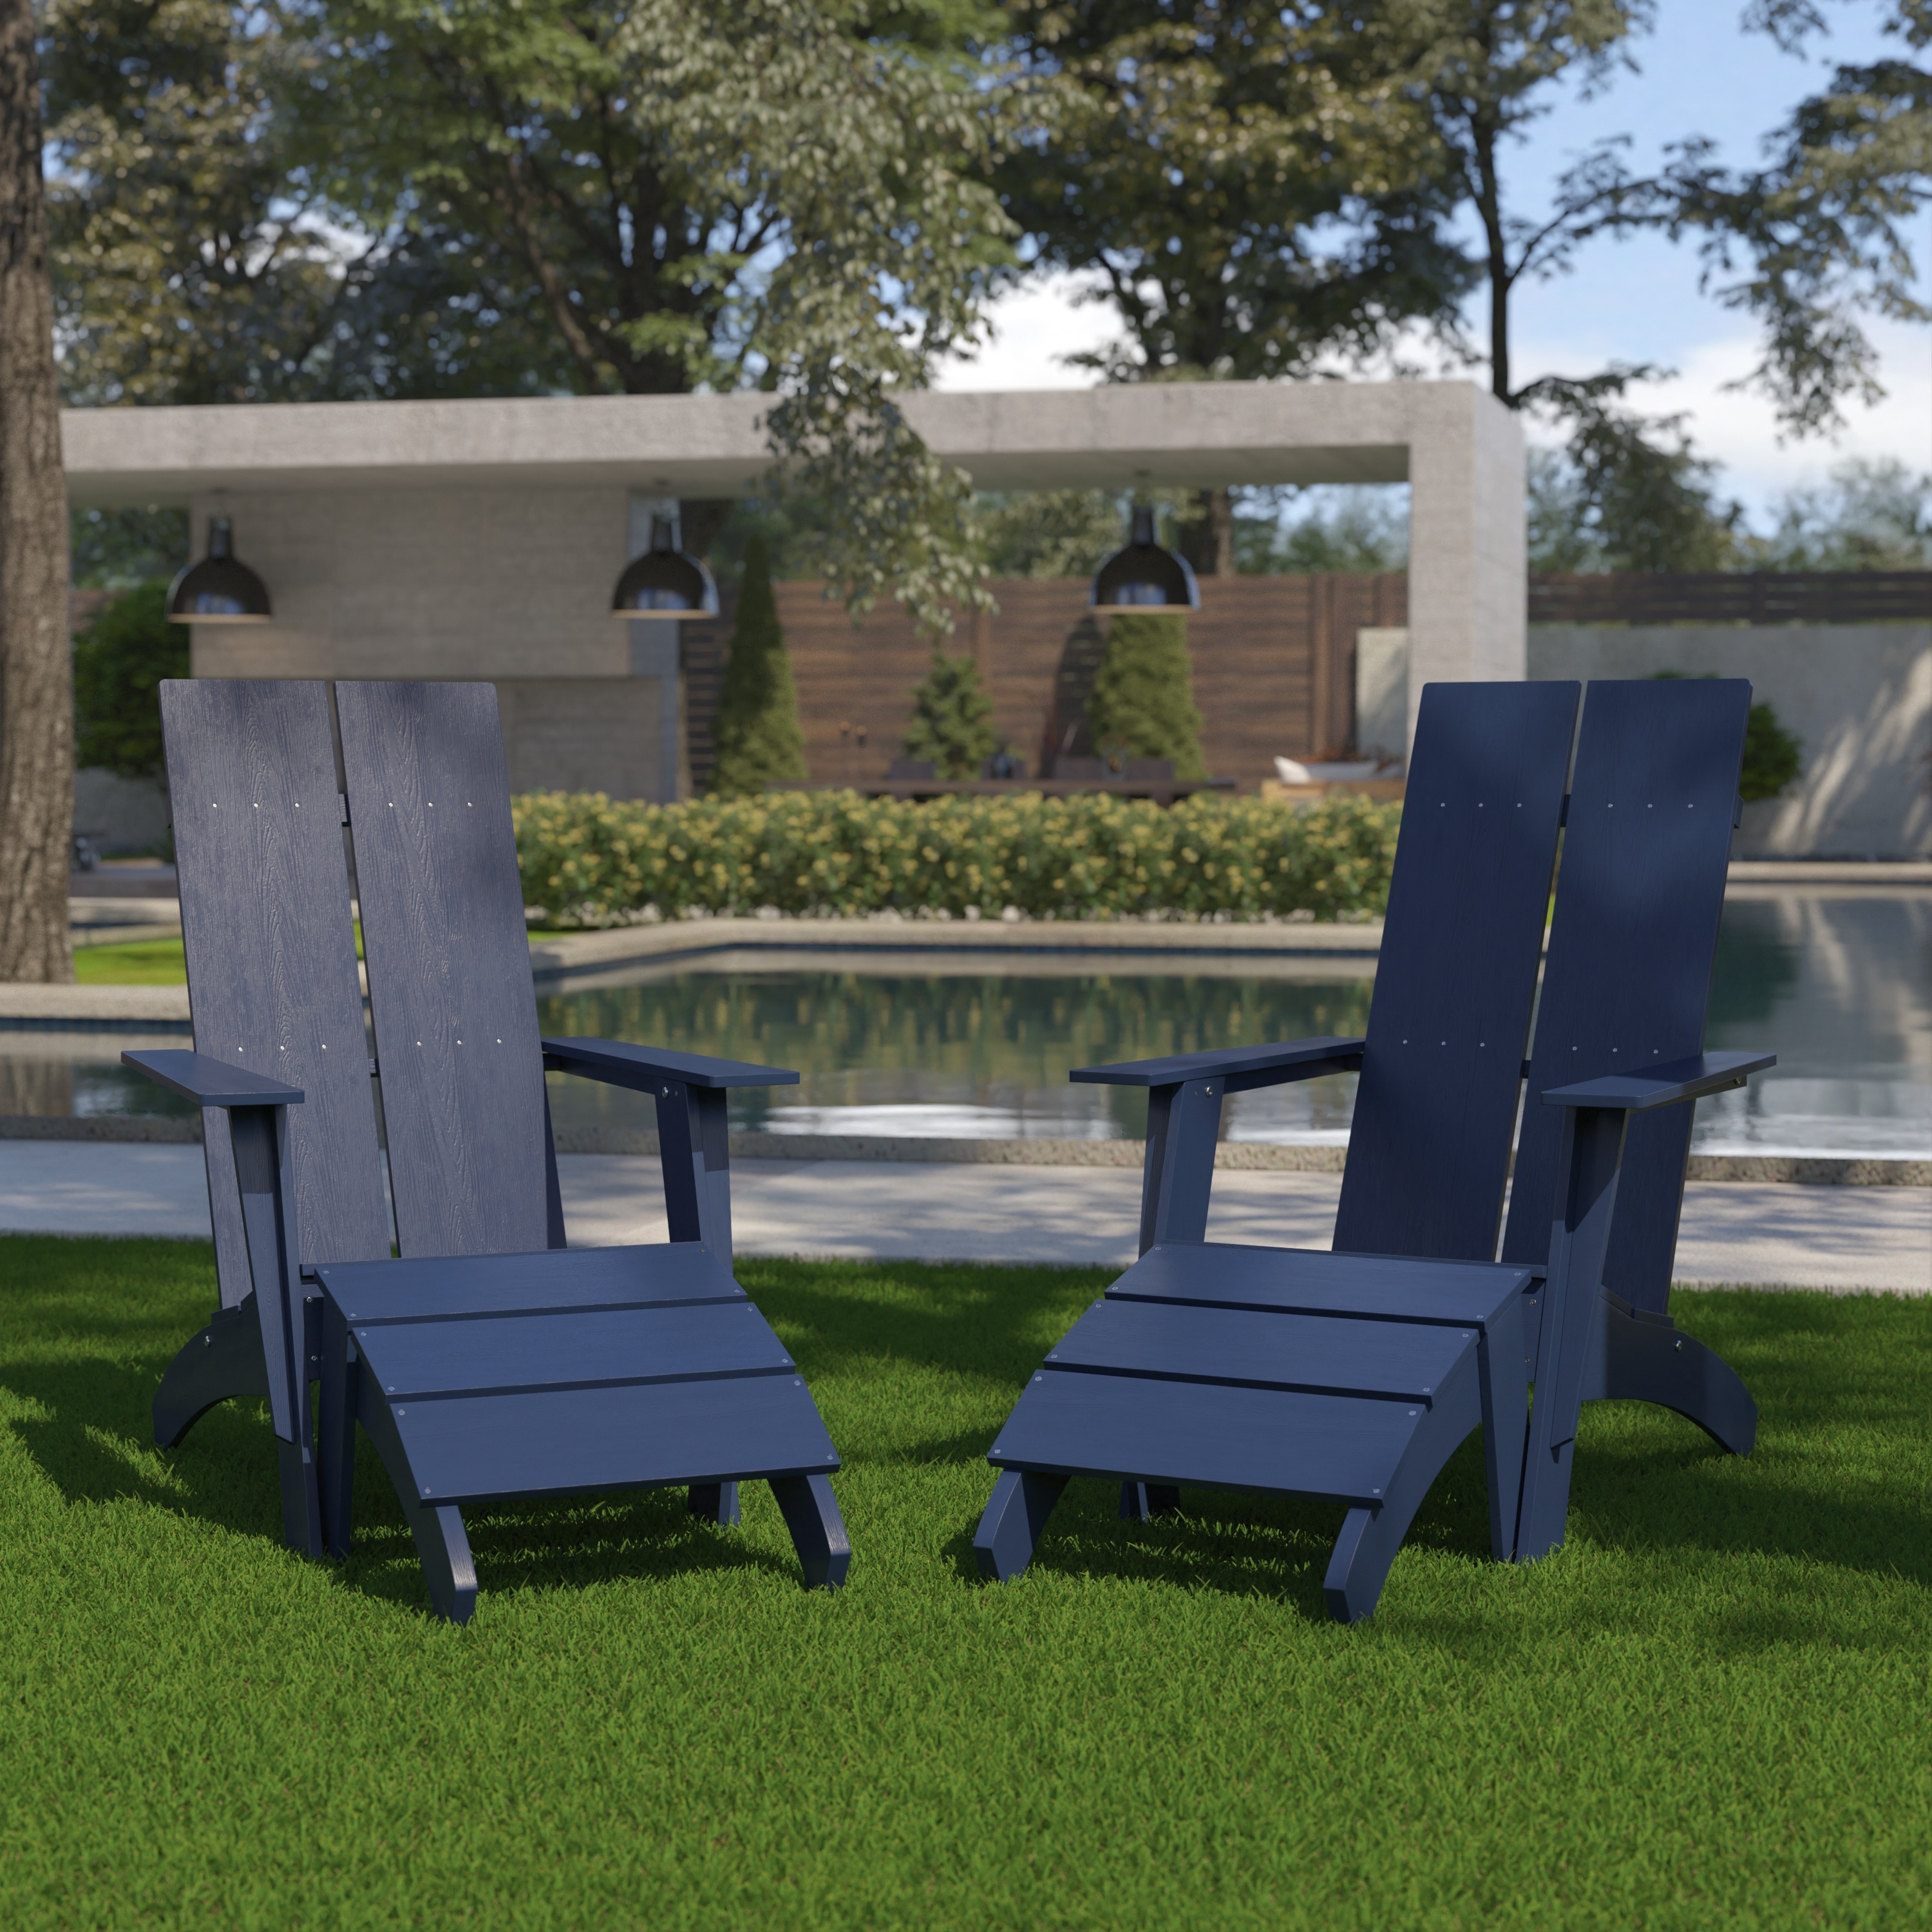 Flash Furniture Set of 2 Indoor/Outdoor 2-Slat Adirondack Style Chairs & Footrests in Gray Navy - image 1 of 5